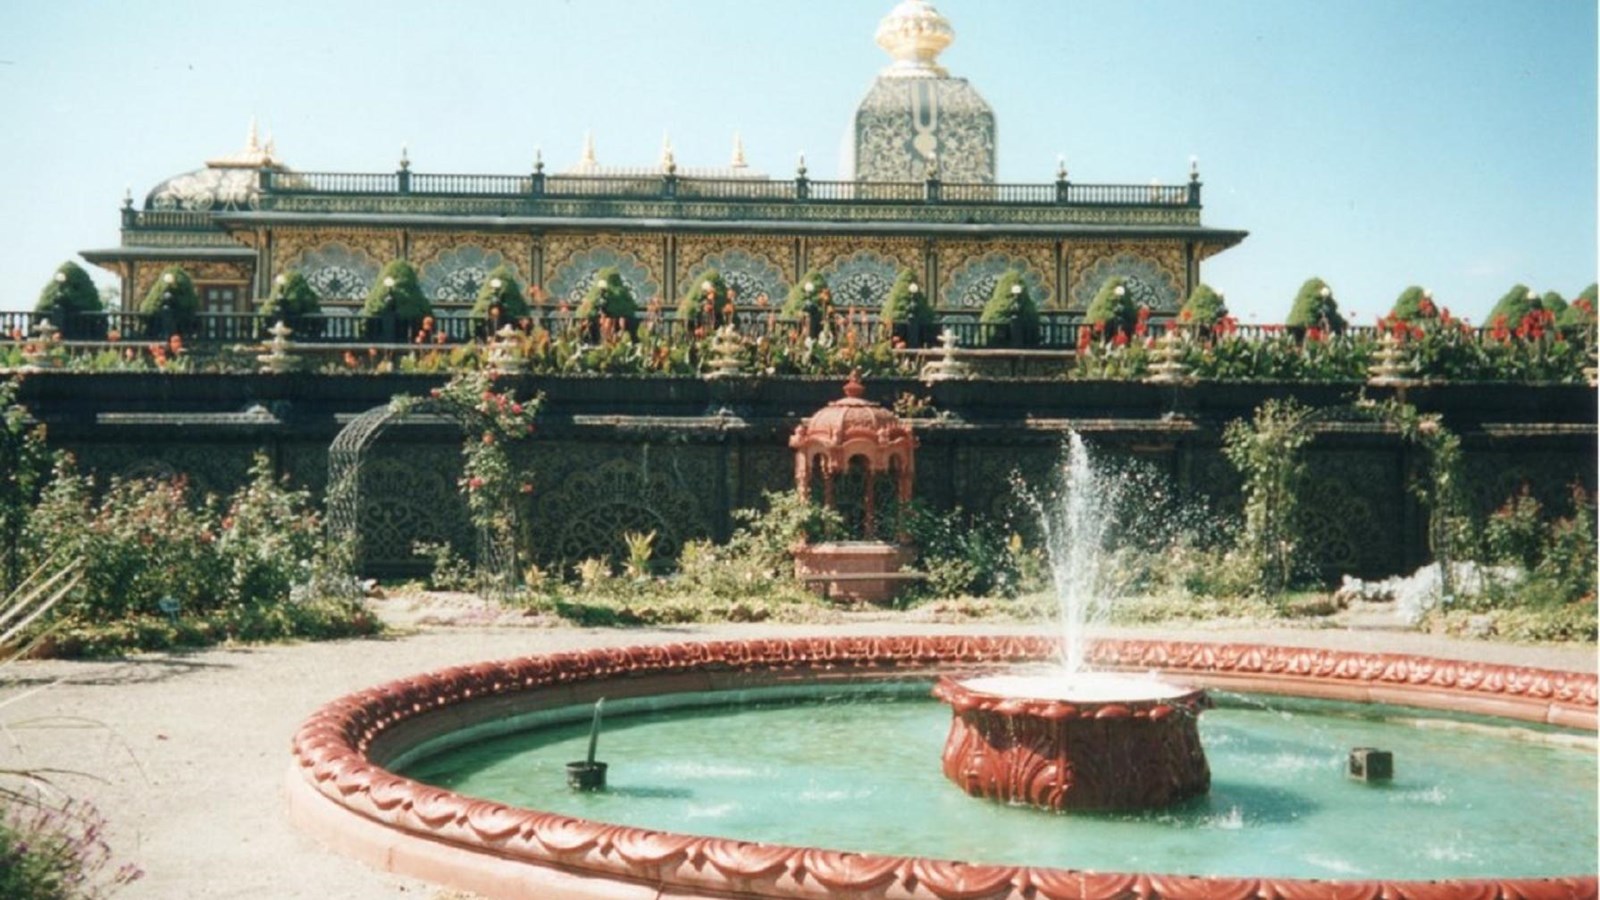 A circular fountain sits in front of an ornate Southeast Asian style building